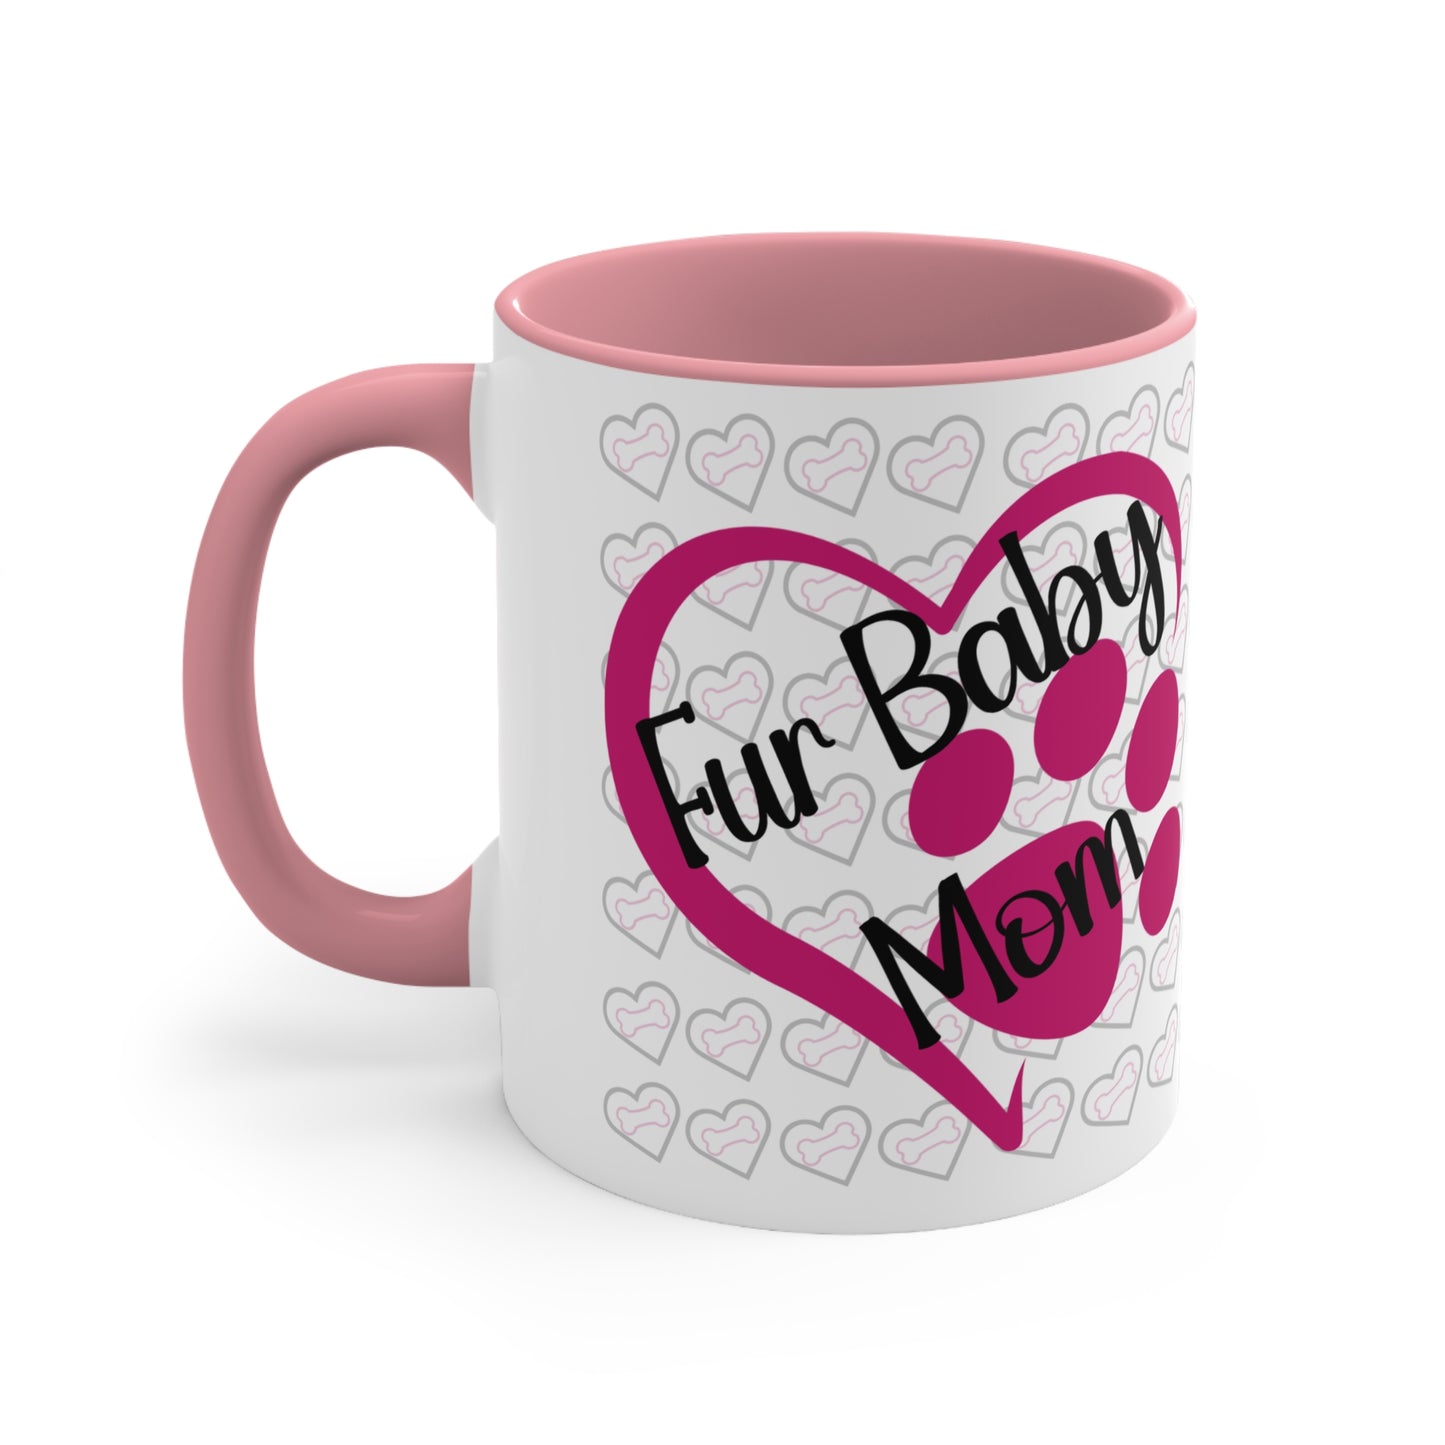 Fur baby mom coffee mug with pink heart and paw print 11 oz, back view in pink.